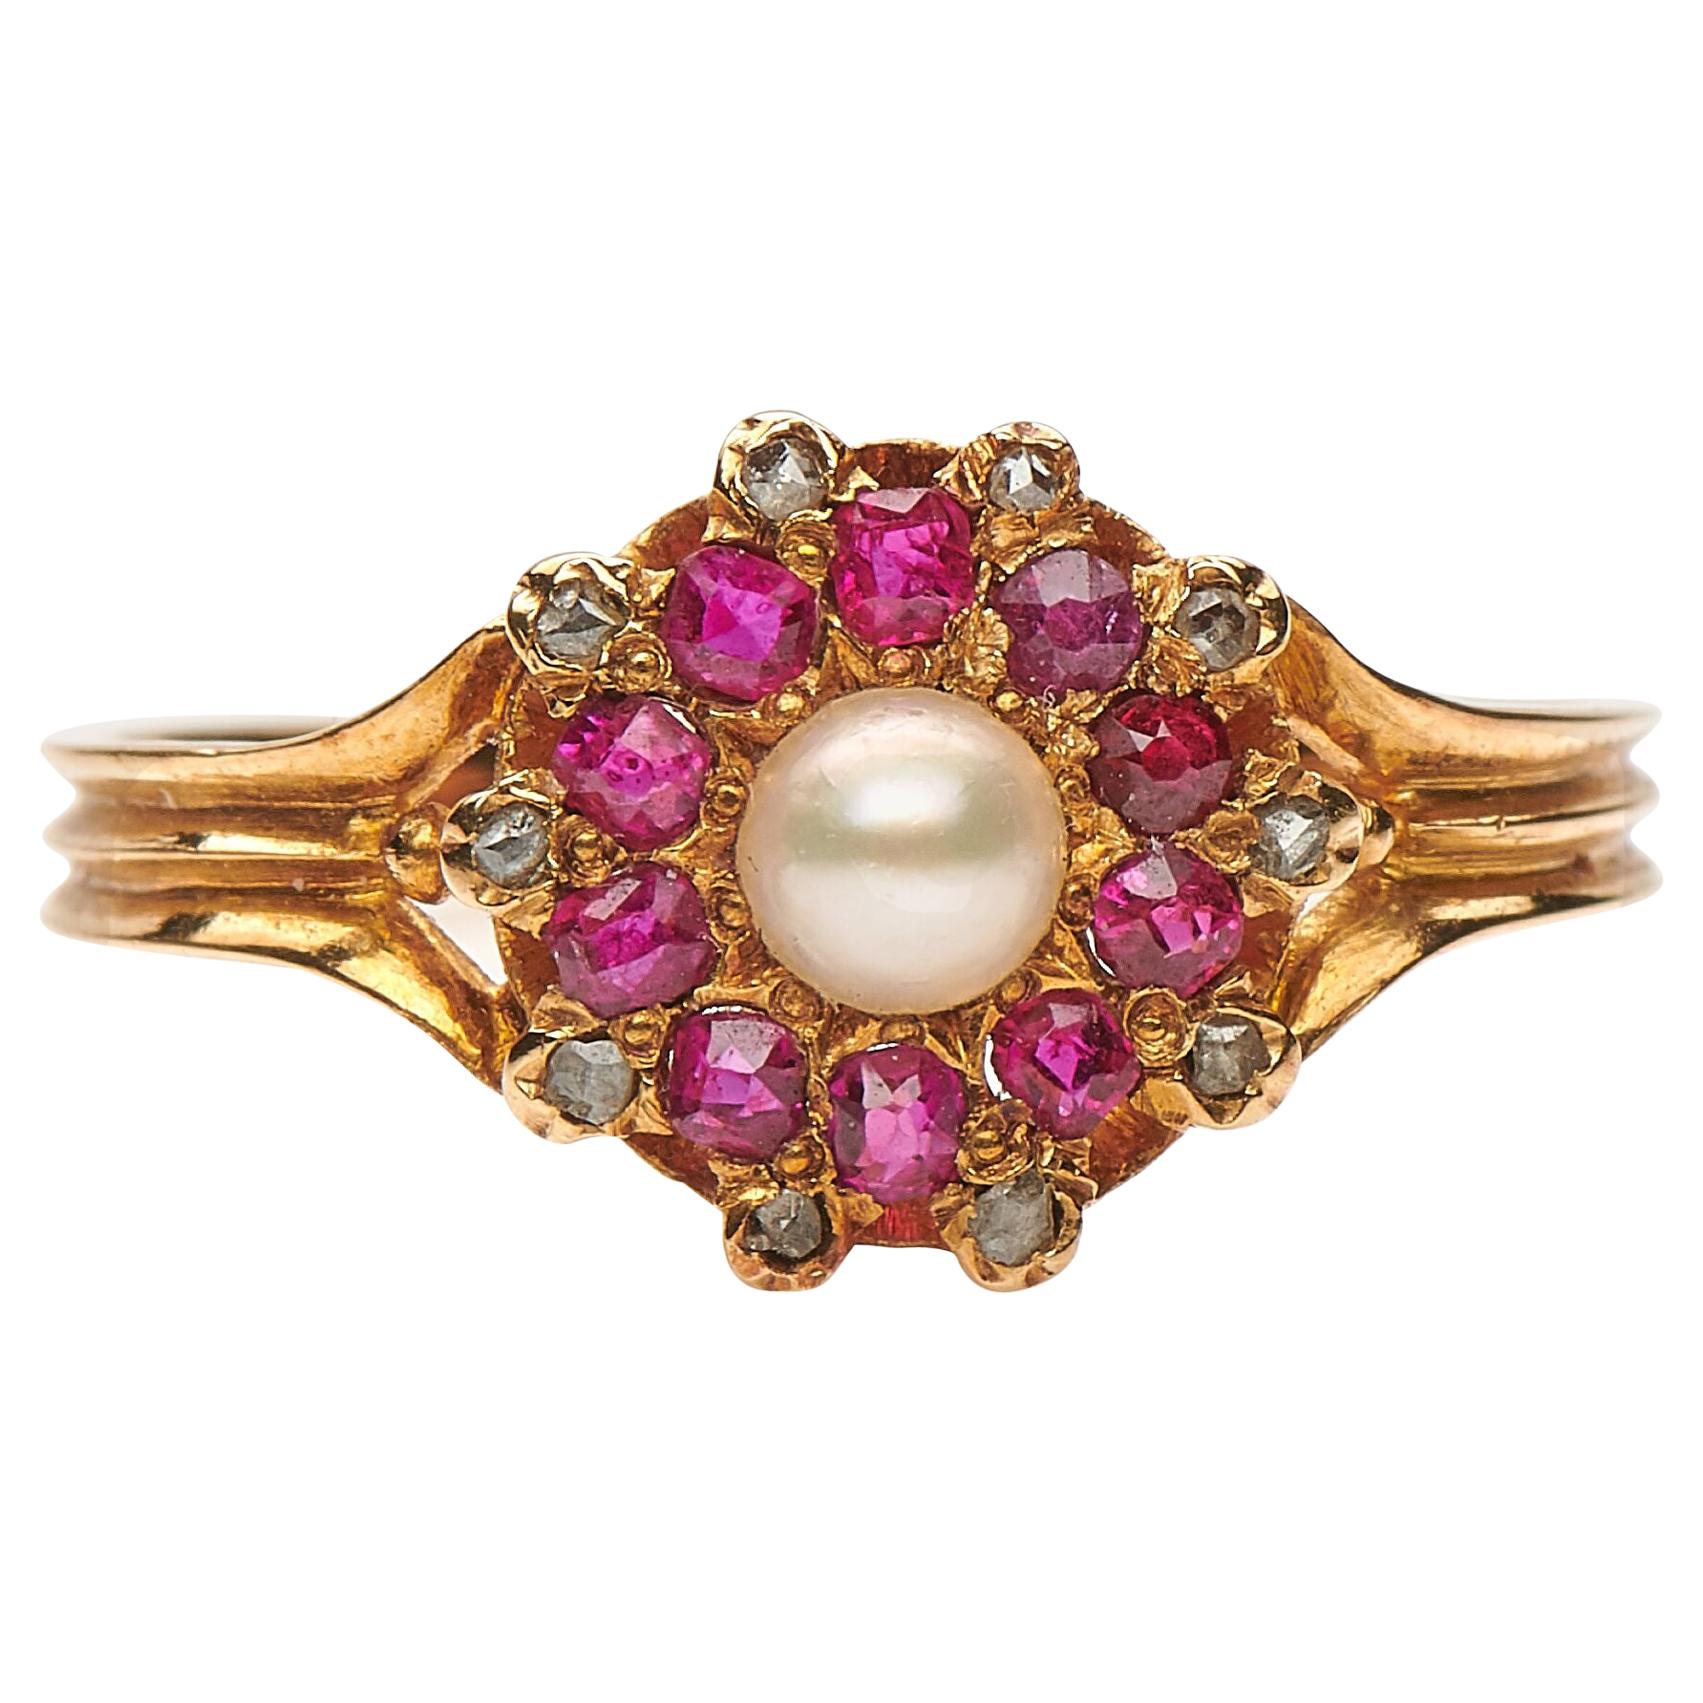 Antique, Edwardian, 18 Carat Yellow Gold, Ruby, Diamond and Pearl Cluster Ring